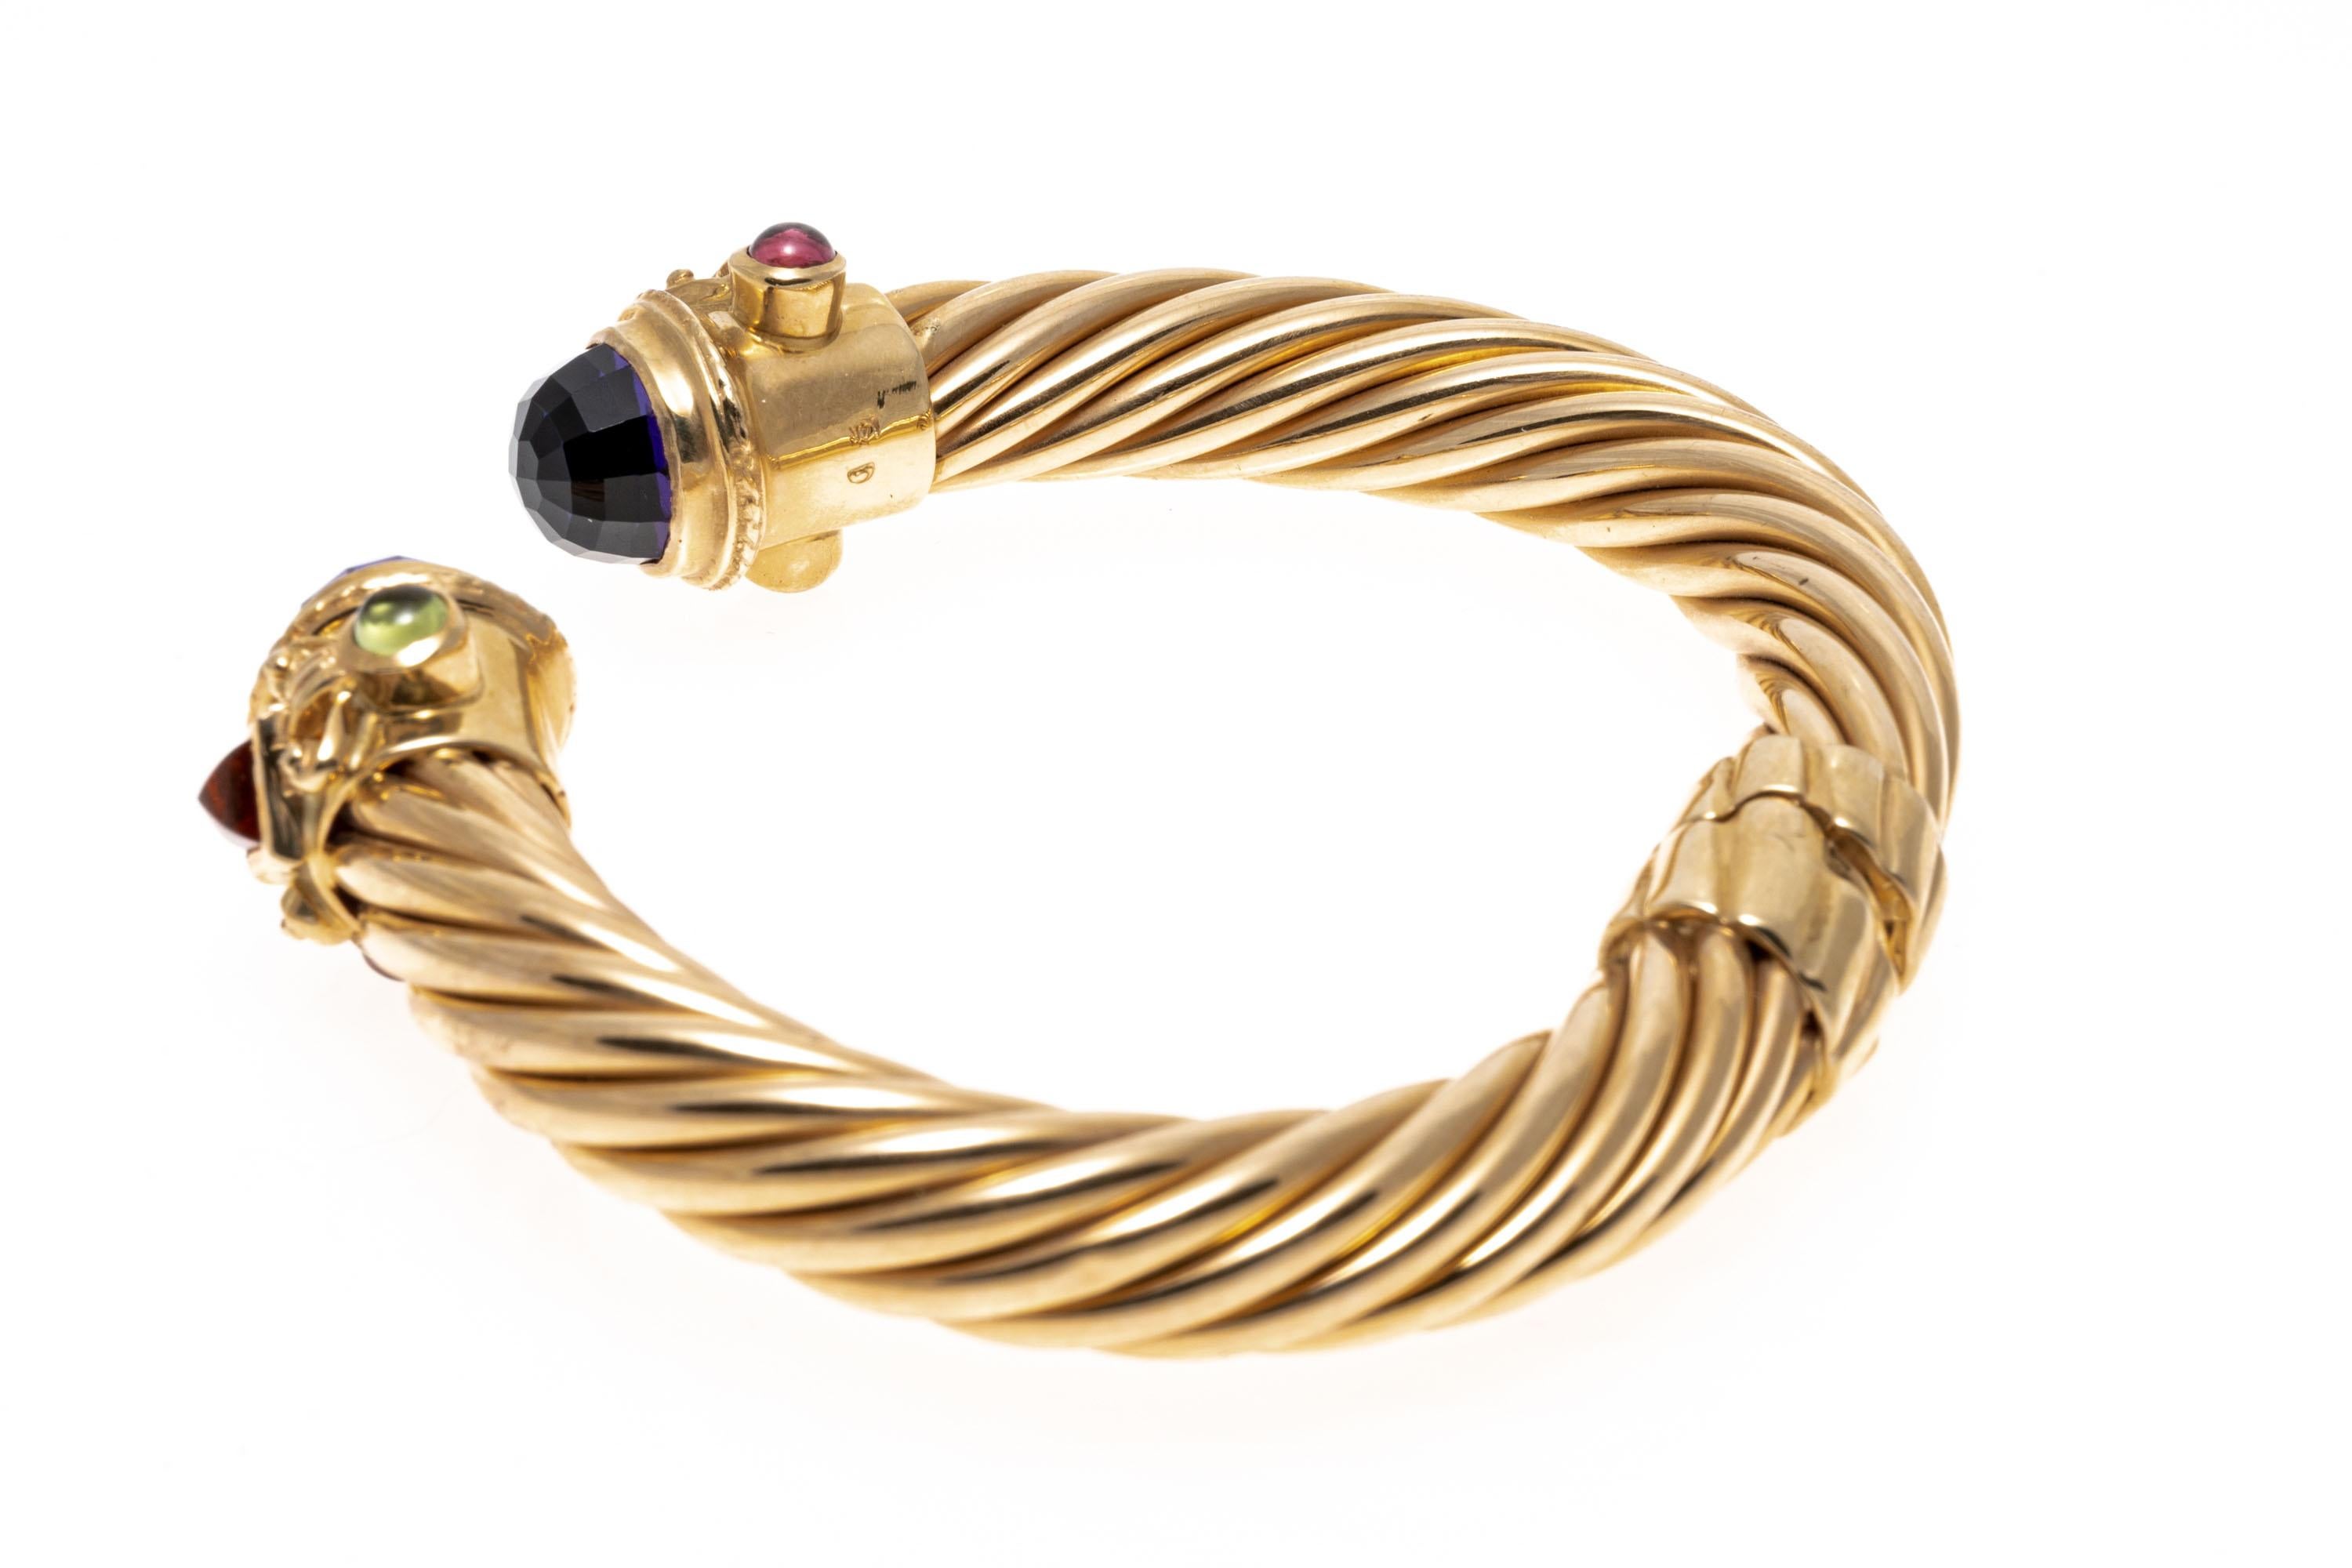 Cabochon 14k Ribbed Hinged Cuff Bangle Bracelet with Amethysts, Tourmalines and Citrines